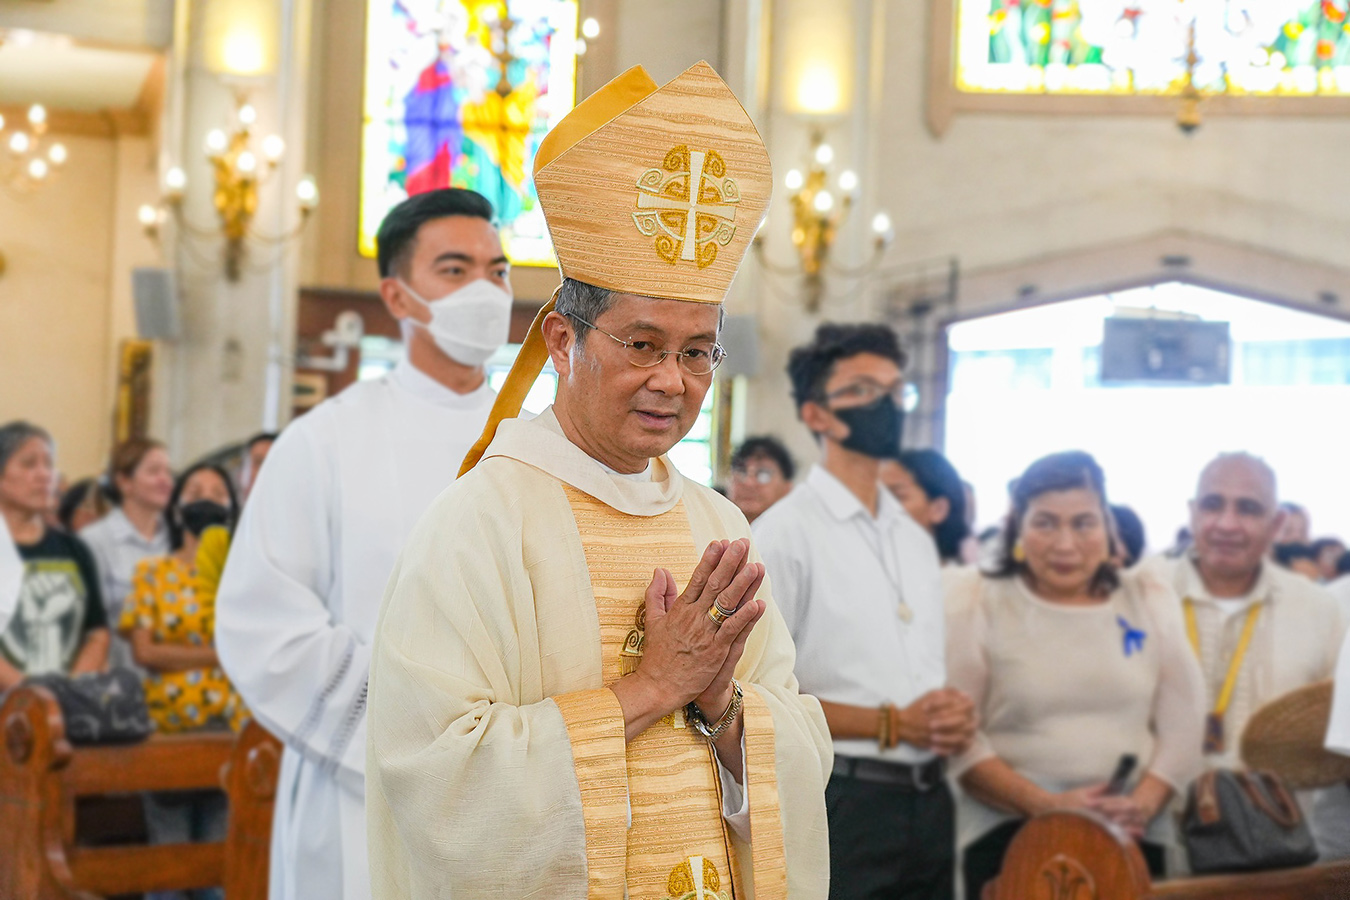 Bishop Ruperto Santos to be installed in Antipolo on July 22